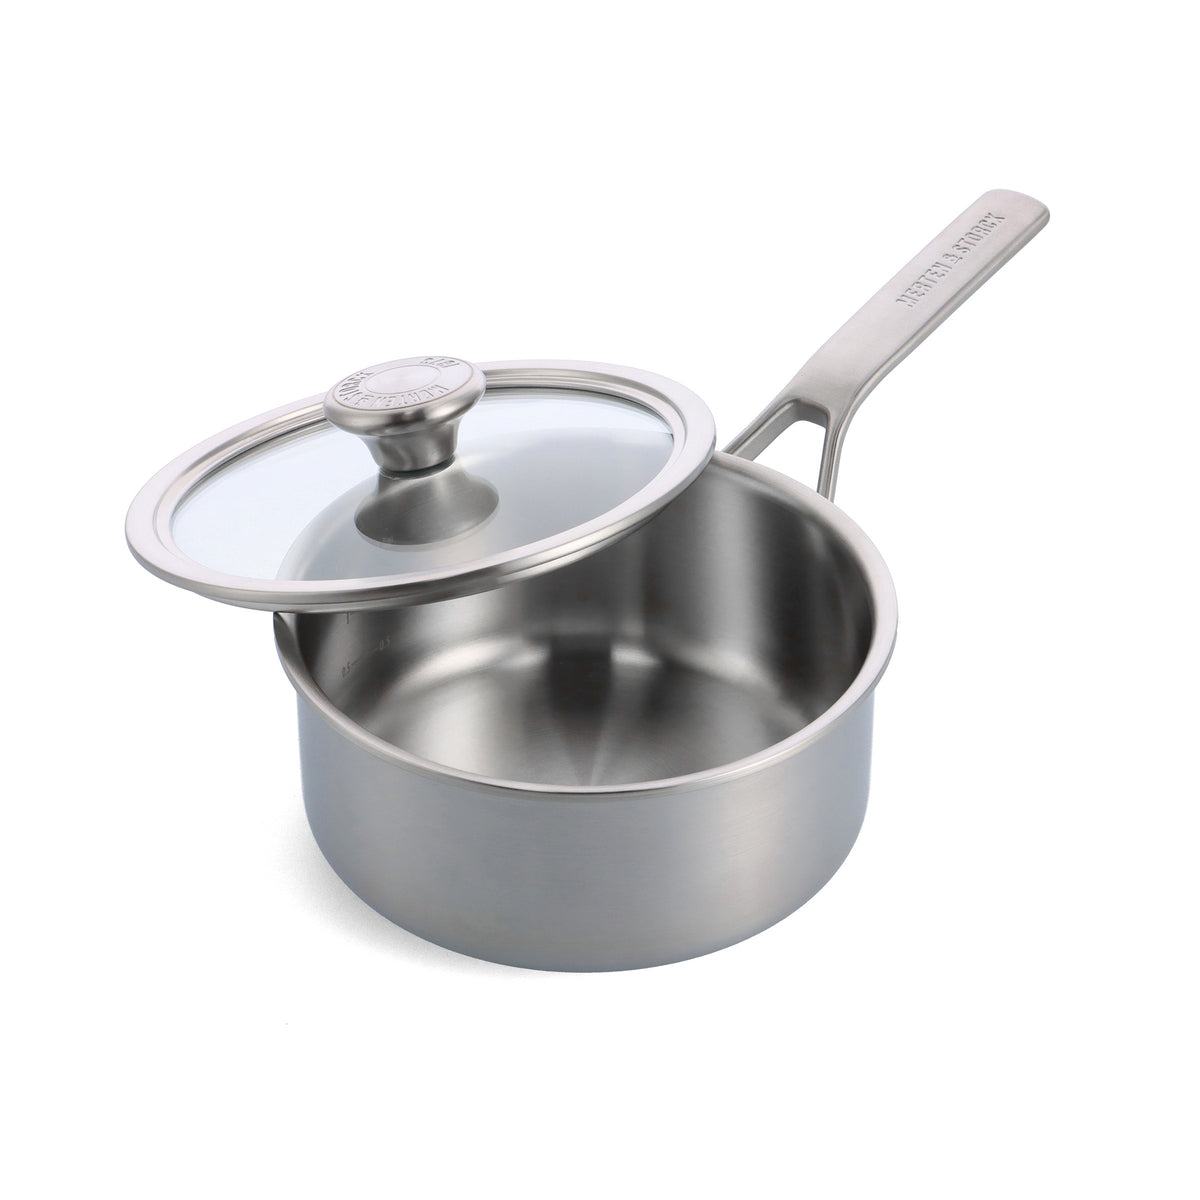  ROYDX Saucepan with Lid, Stainless Steel Stock Pot